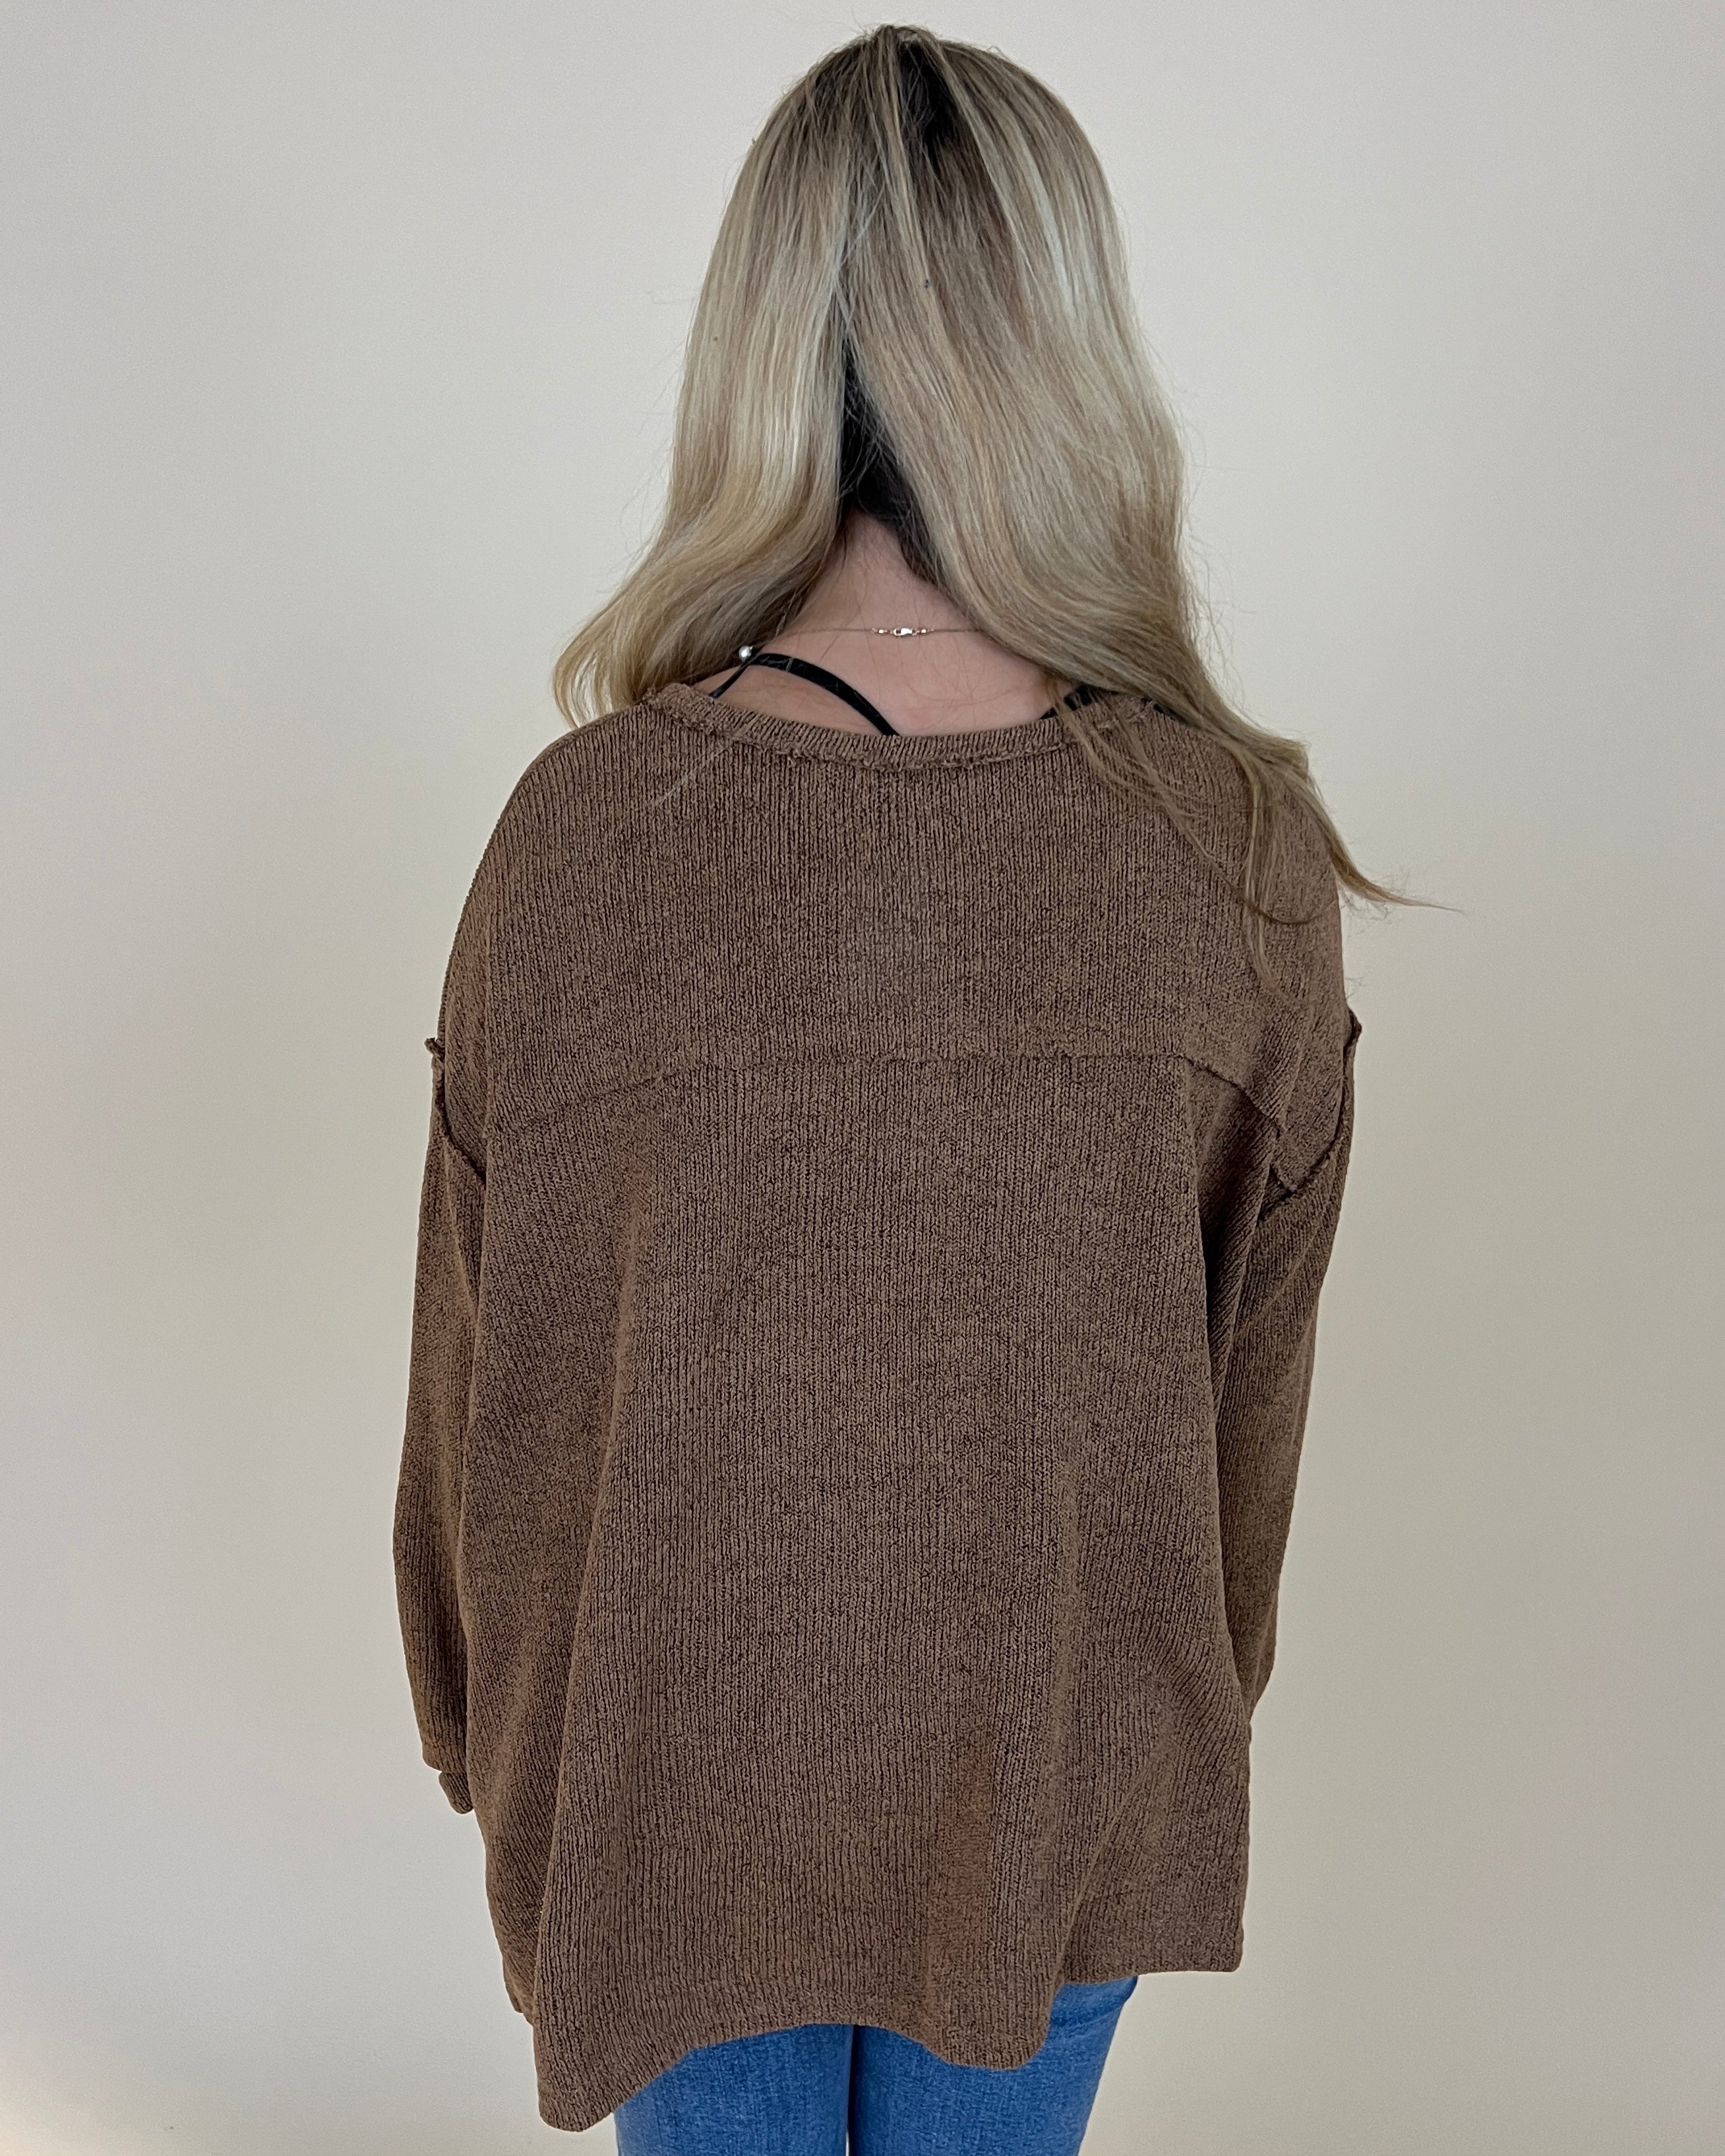 Call Me Later Ochre Knit Boxy Raw Edge Top-Shop-Womens-Boutique-Clothing